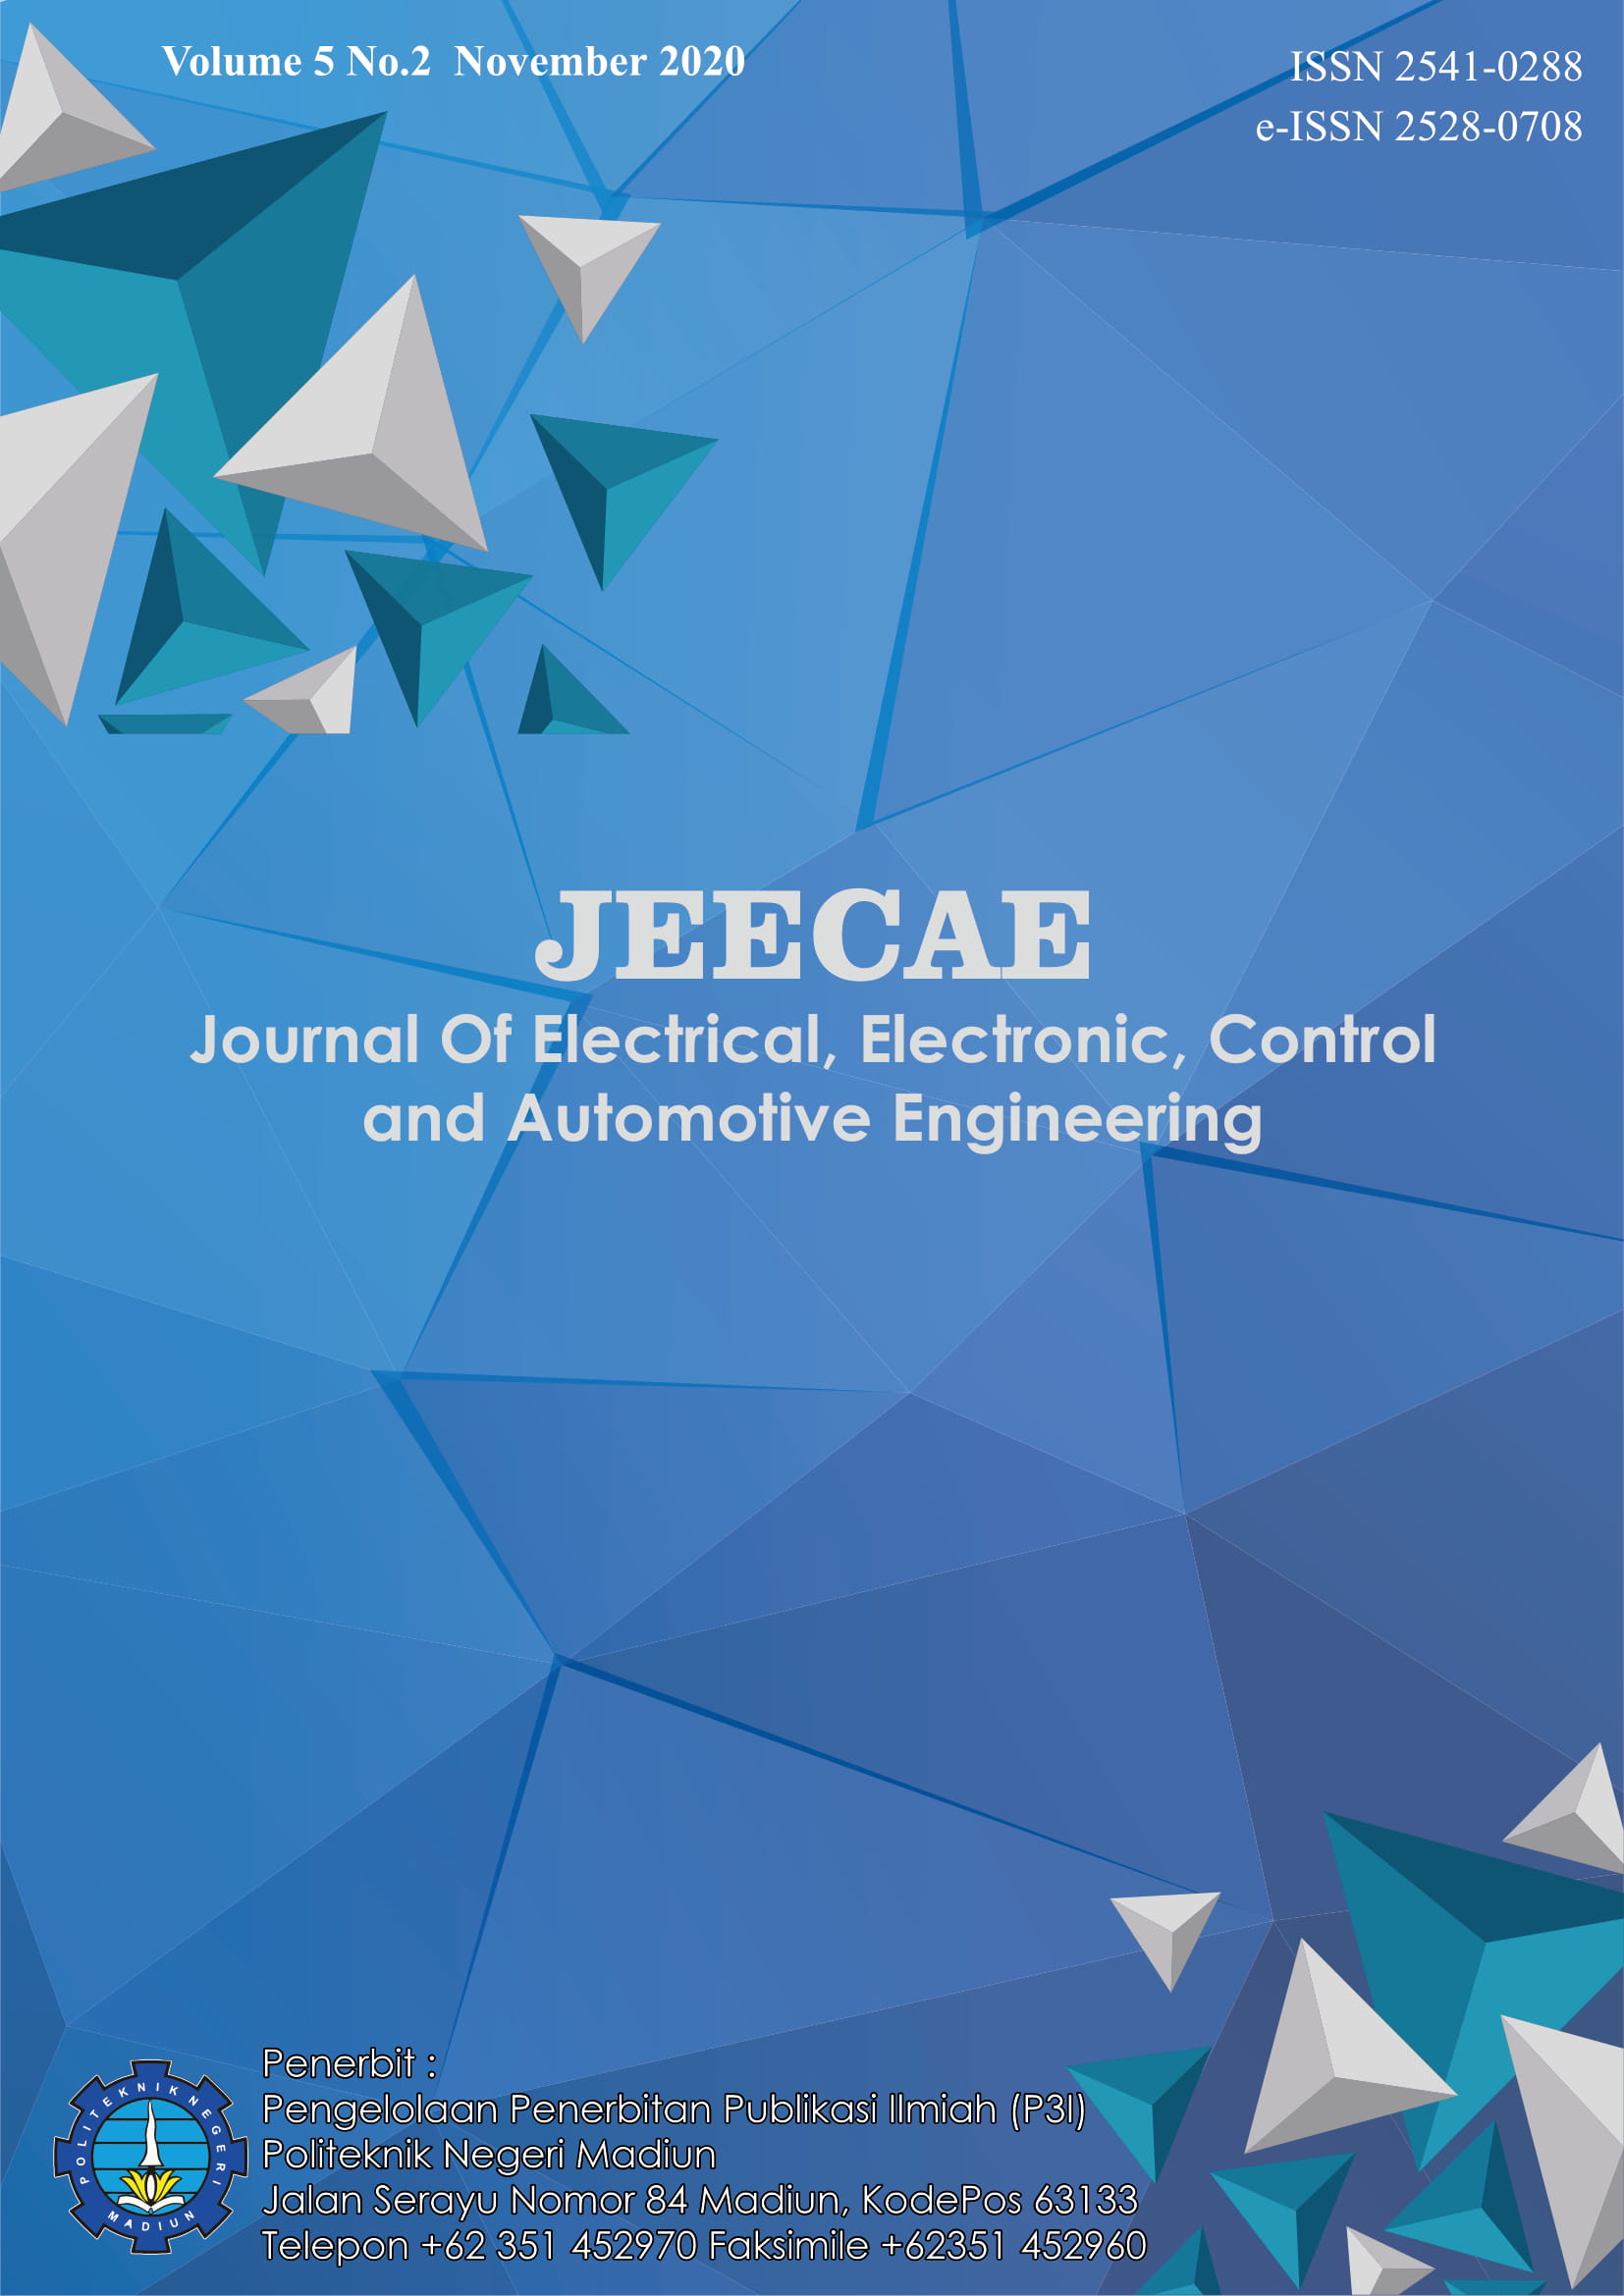 					View Vol. 5 No. 2 (2020): JOURNAL OF ELECTRICAL, ELECTRONICS, CONTROL, AND AUTOMOTIVE ENGINEERING (JEECAE)
				